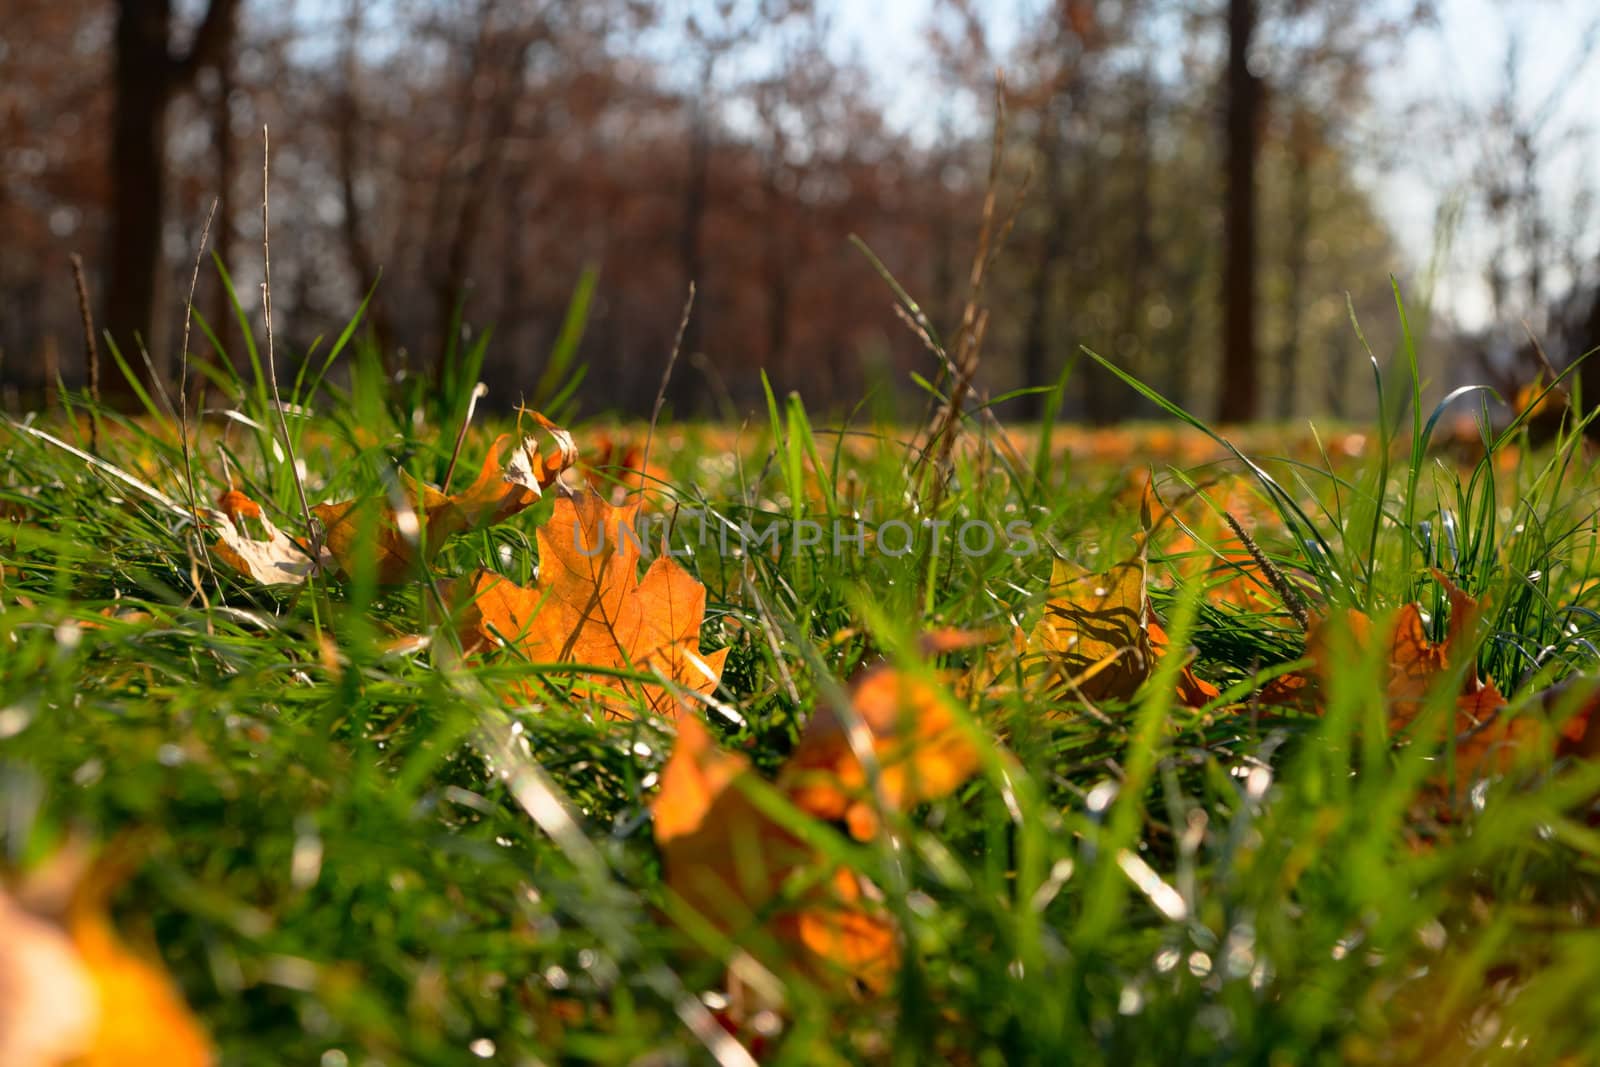 The fallen colorful leaves on the bright green grass